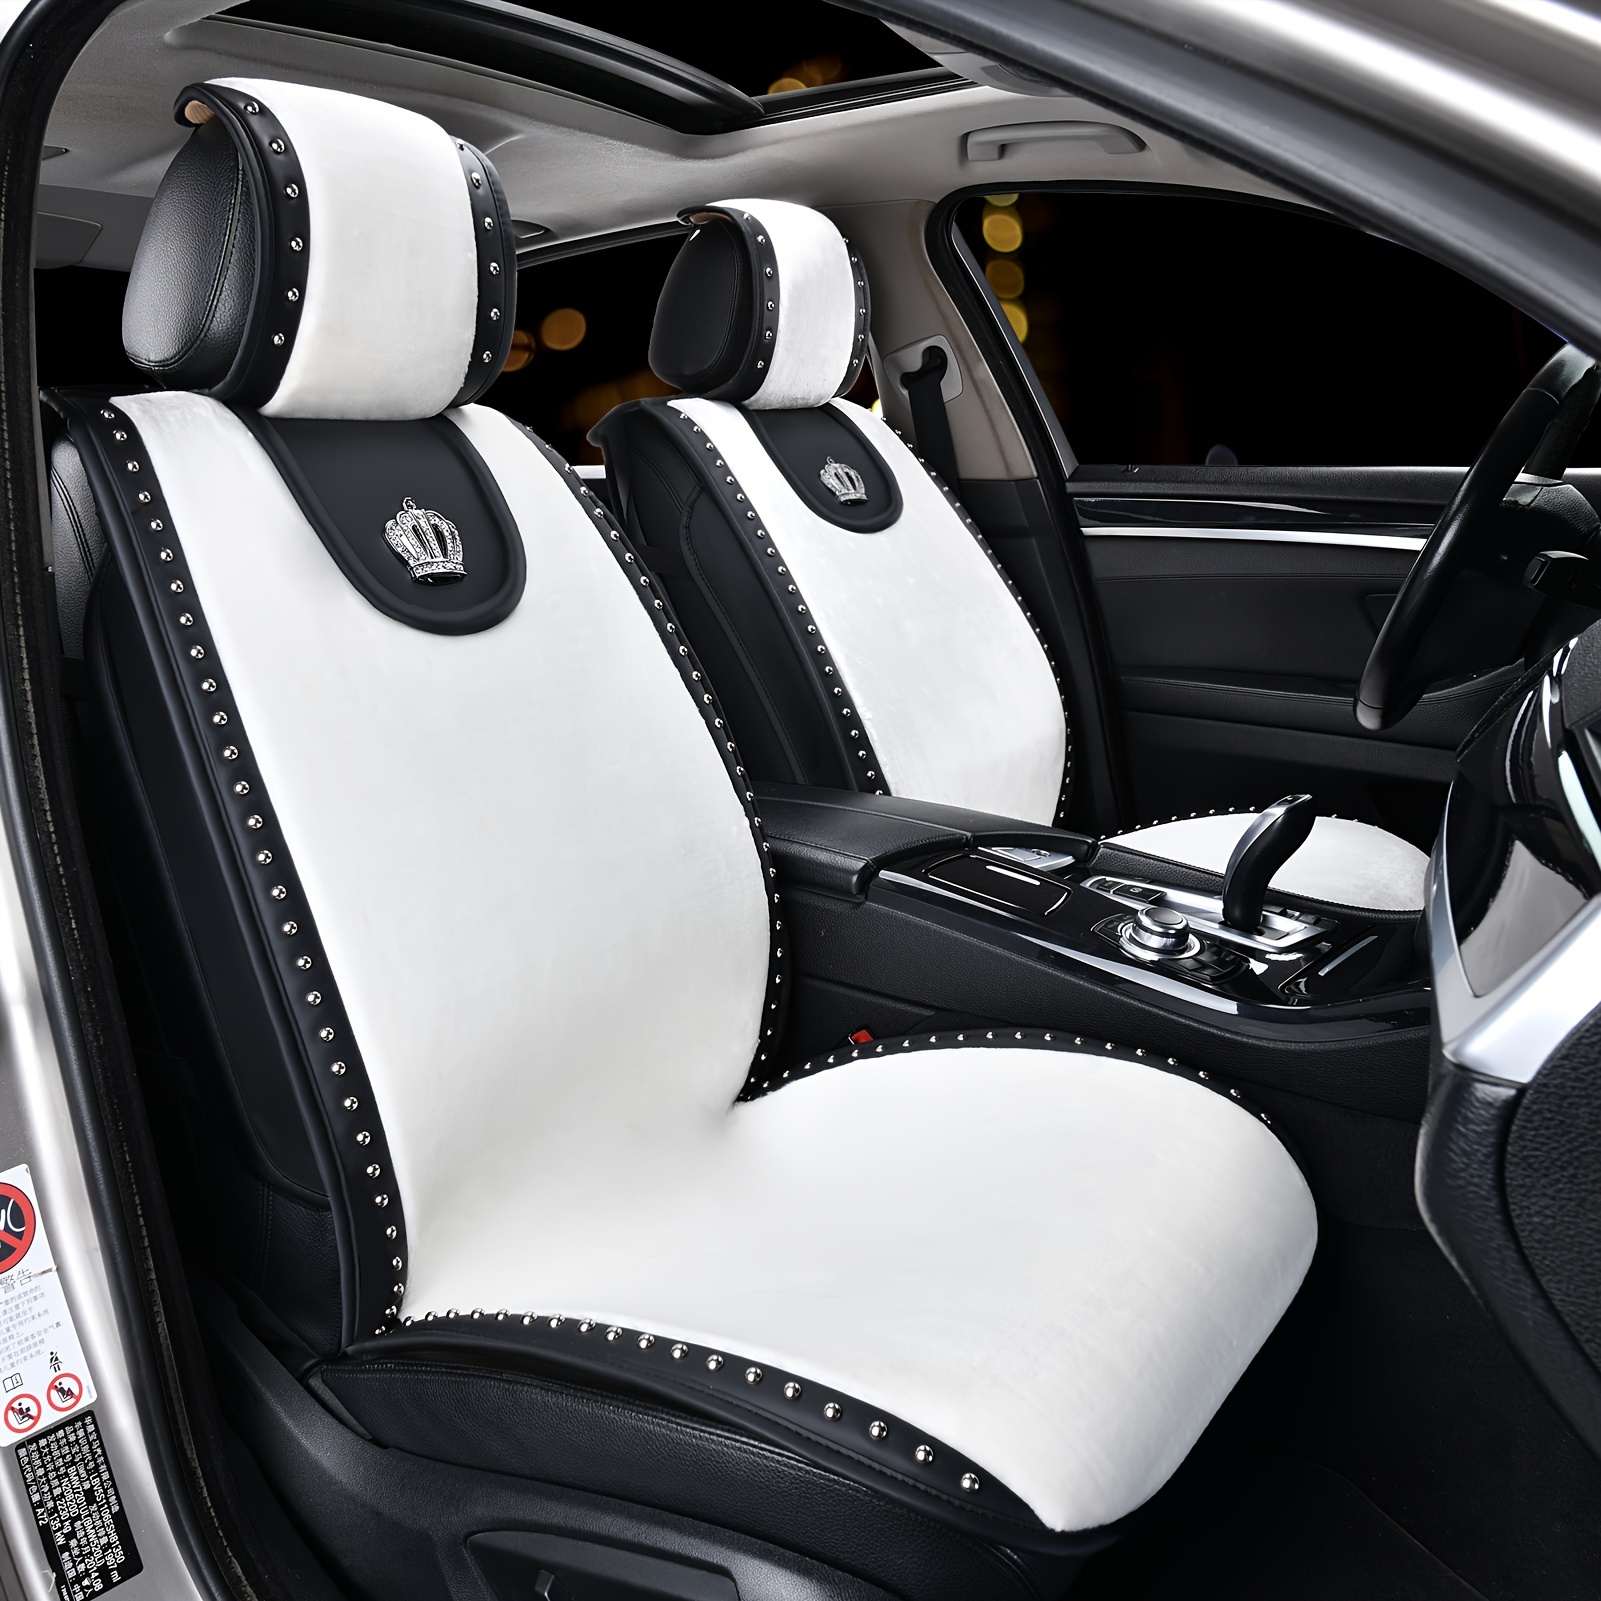 https://img.kwcdn.com/product/leather-material-white-queen-seat-covers/d69d2f15w98k18-4415d2aa/Fancyalgo/VirtualModelMatting/76505908a47af73e8be0c92ae064868d.jpg